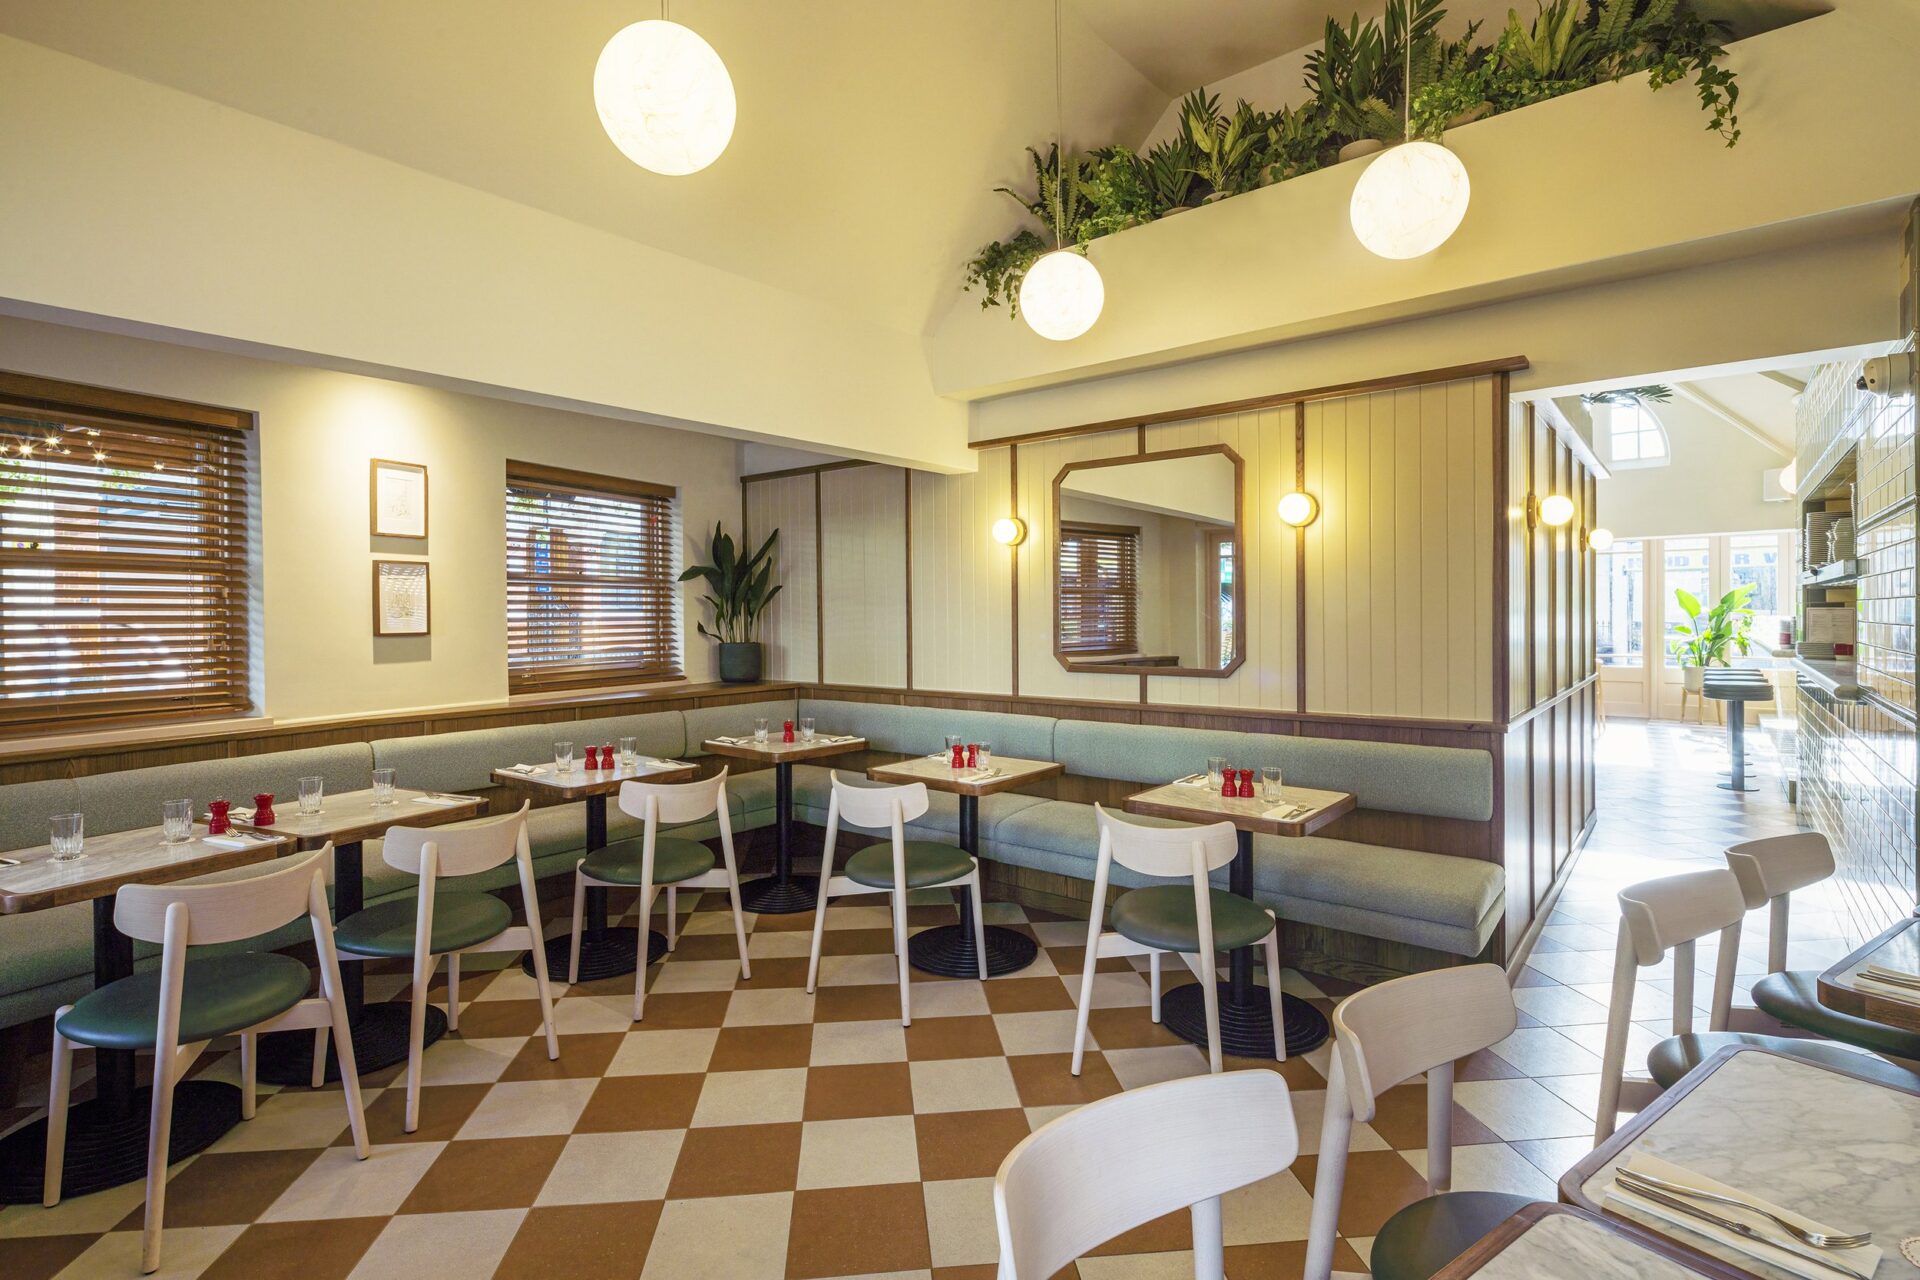 Audrey's Cafe & Bar Borough modern and retro restaurant designed by 3Stories Interior Design and branding creative agency London, featuring checkered floor, cosy and unpretencious interior